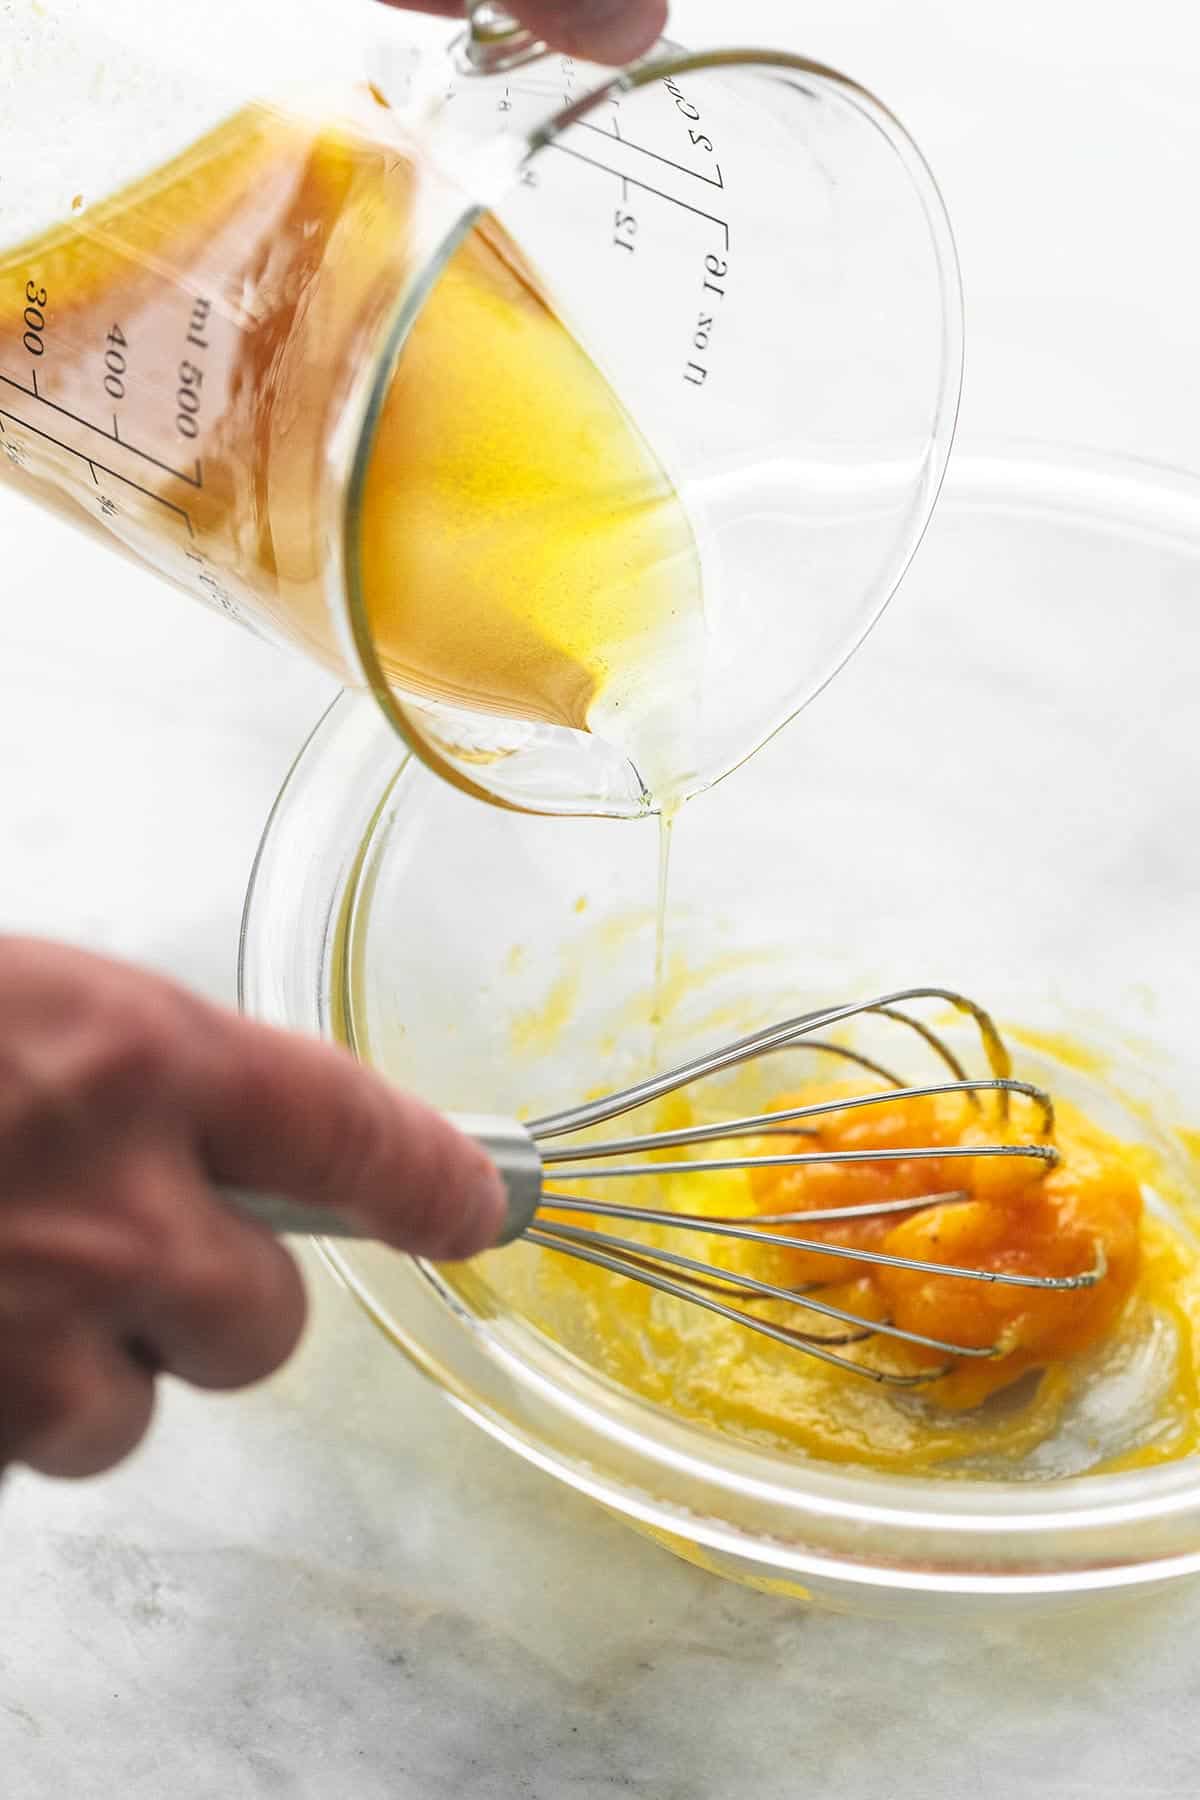 hands whisking egg yolks in a glass bowl and pouring olive oil into the bowl.